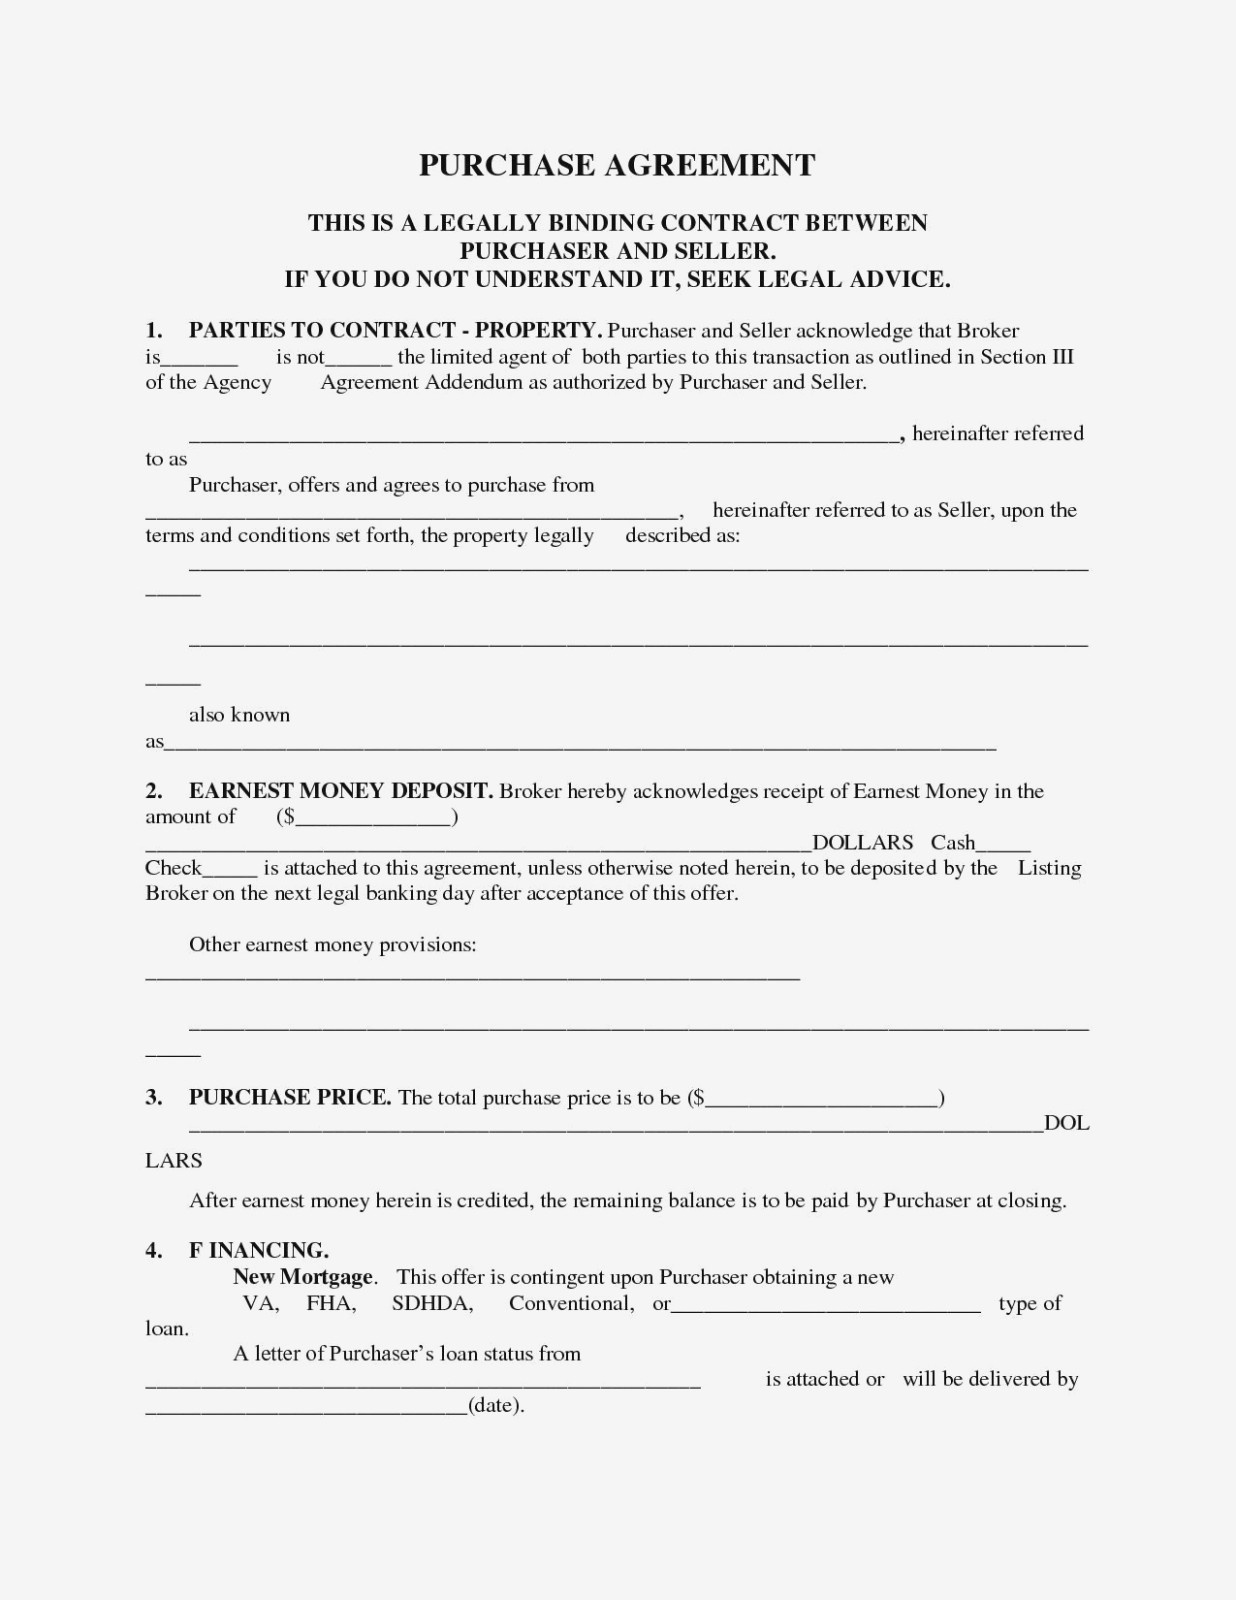 Free Printable Real Estate Assignment Contract Form #11 – Free - Free Printable Real Estate Forms